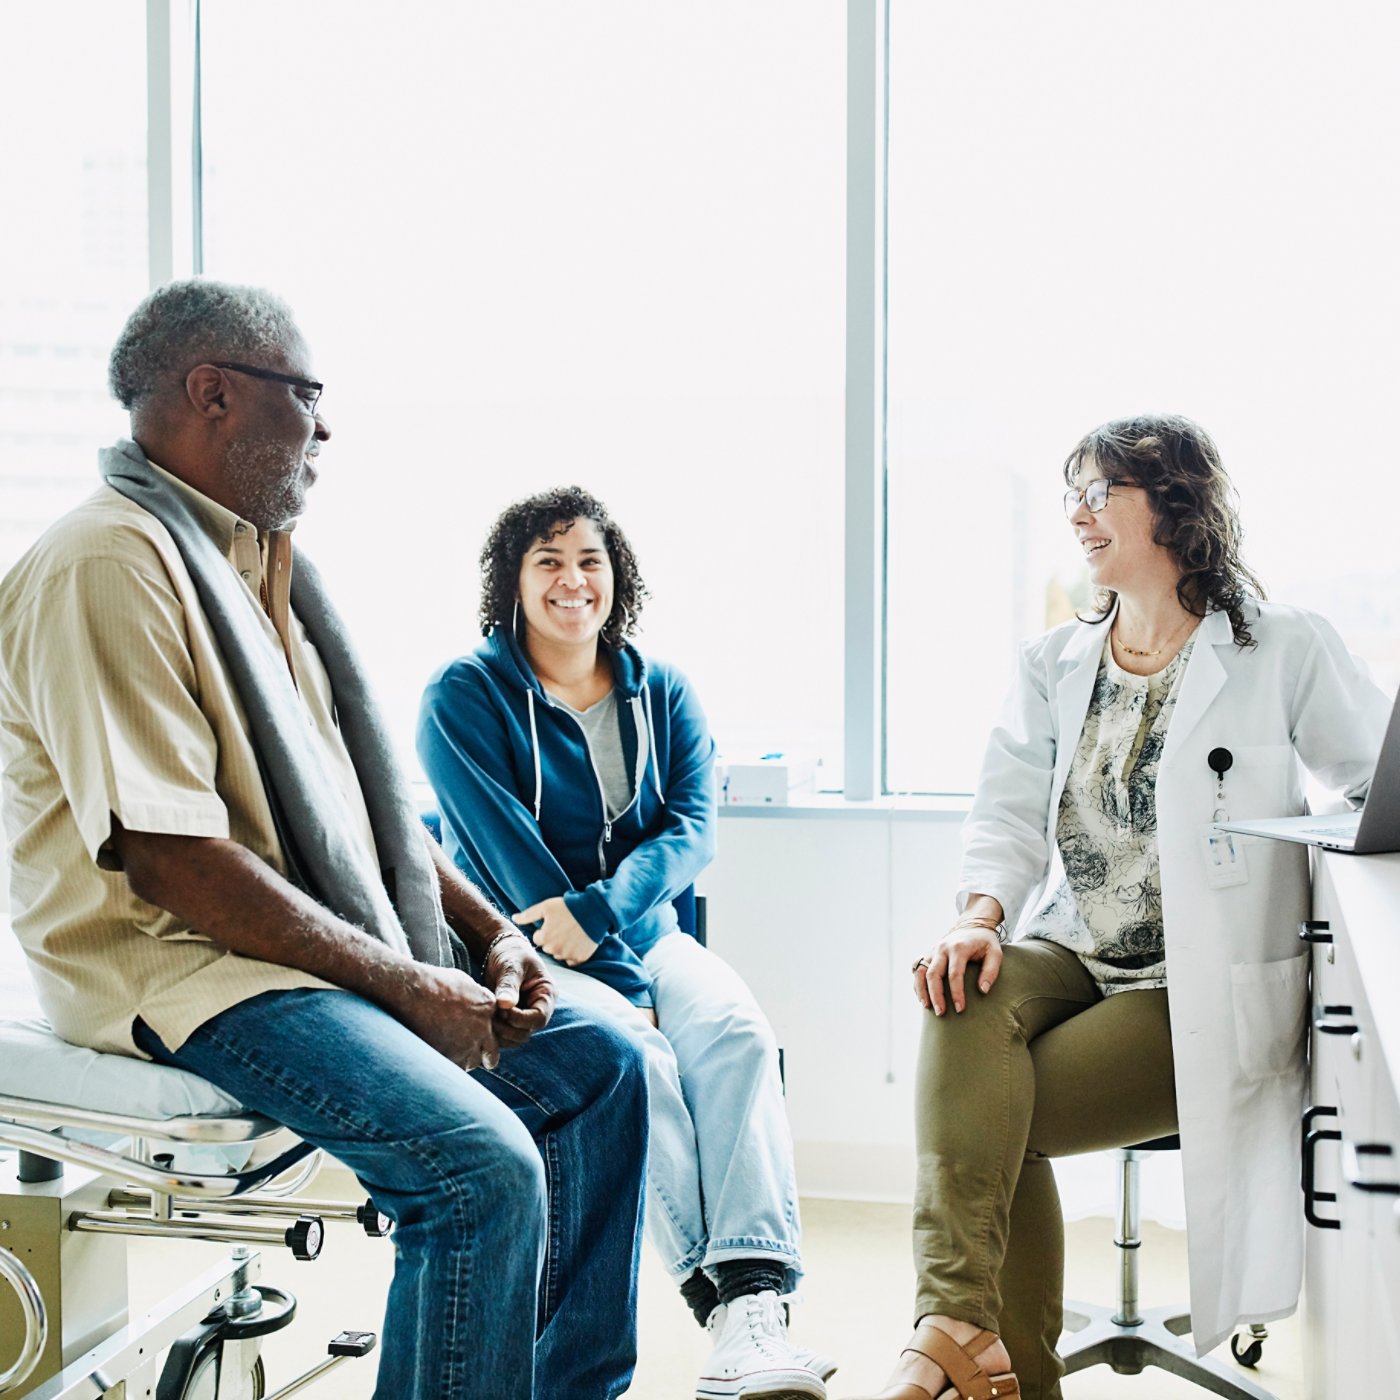 Smiling female doctor consulting with senior male patient and adult daughter in exam room